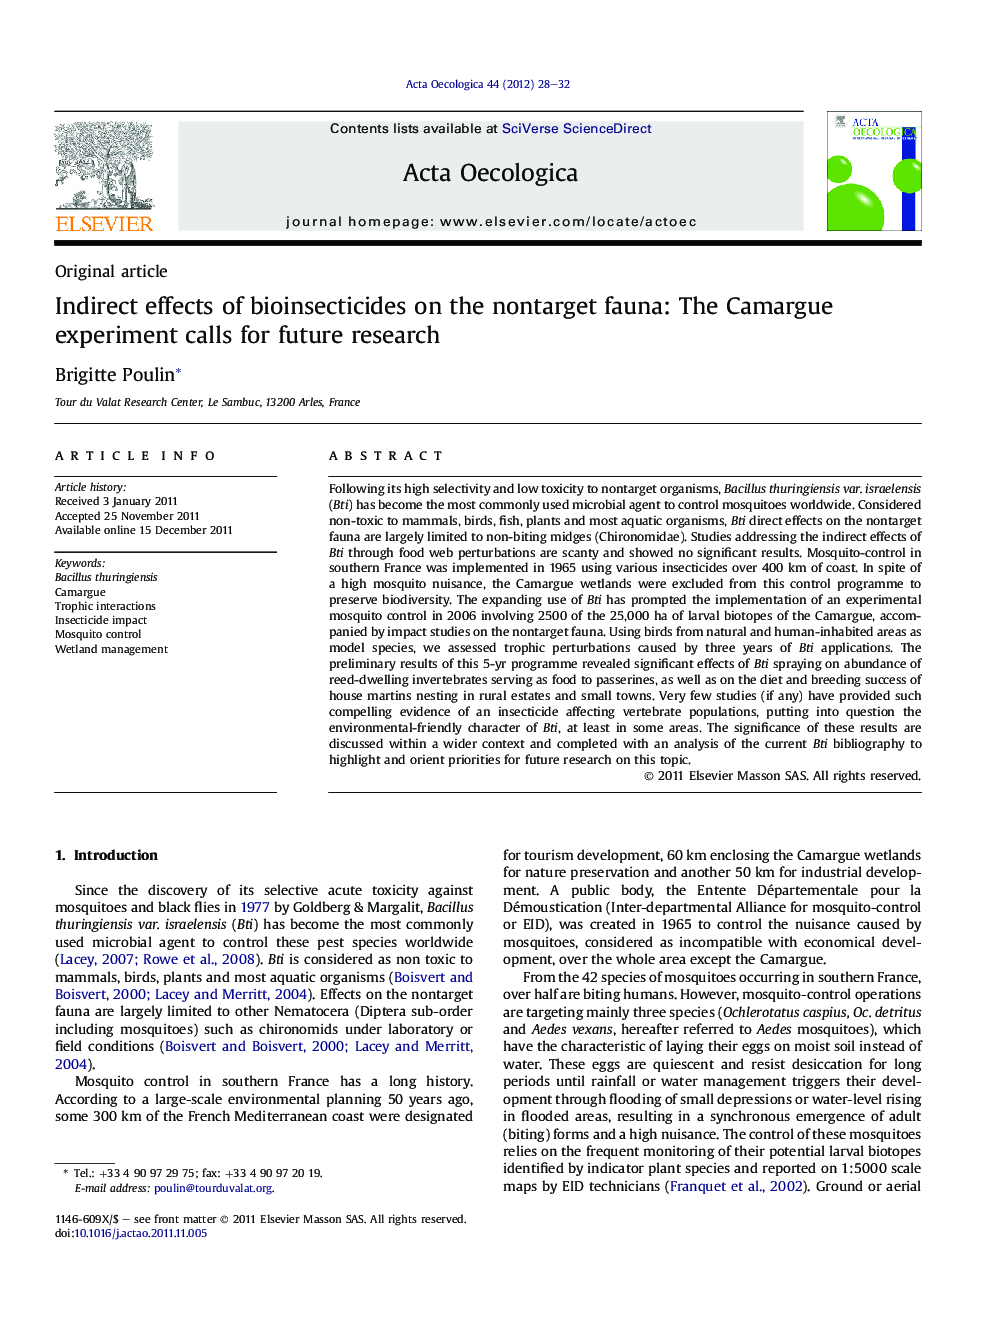 Indirect effects of bioinsecticides on the nontarget fauna: The Camargue experiment calls for future research